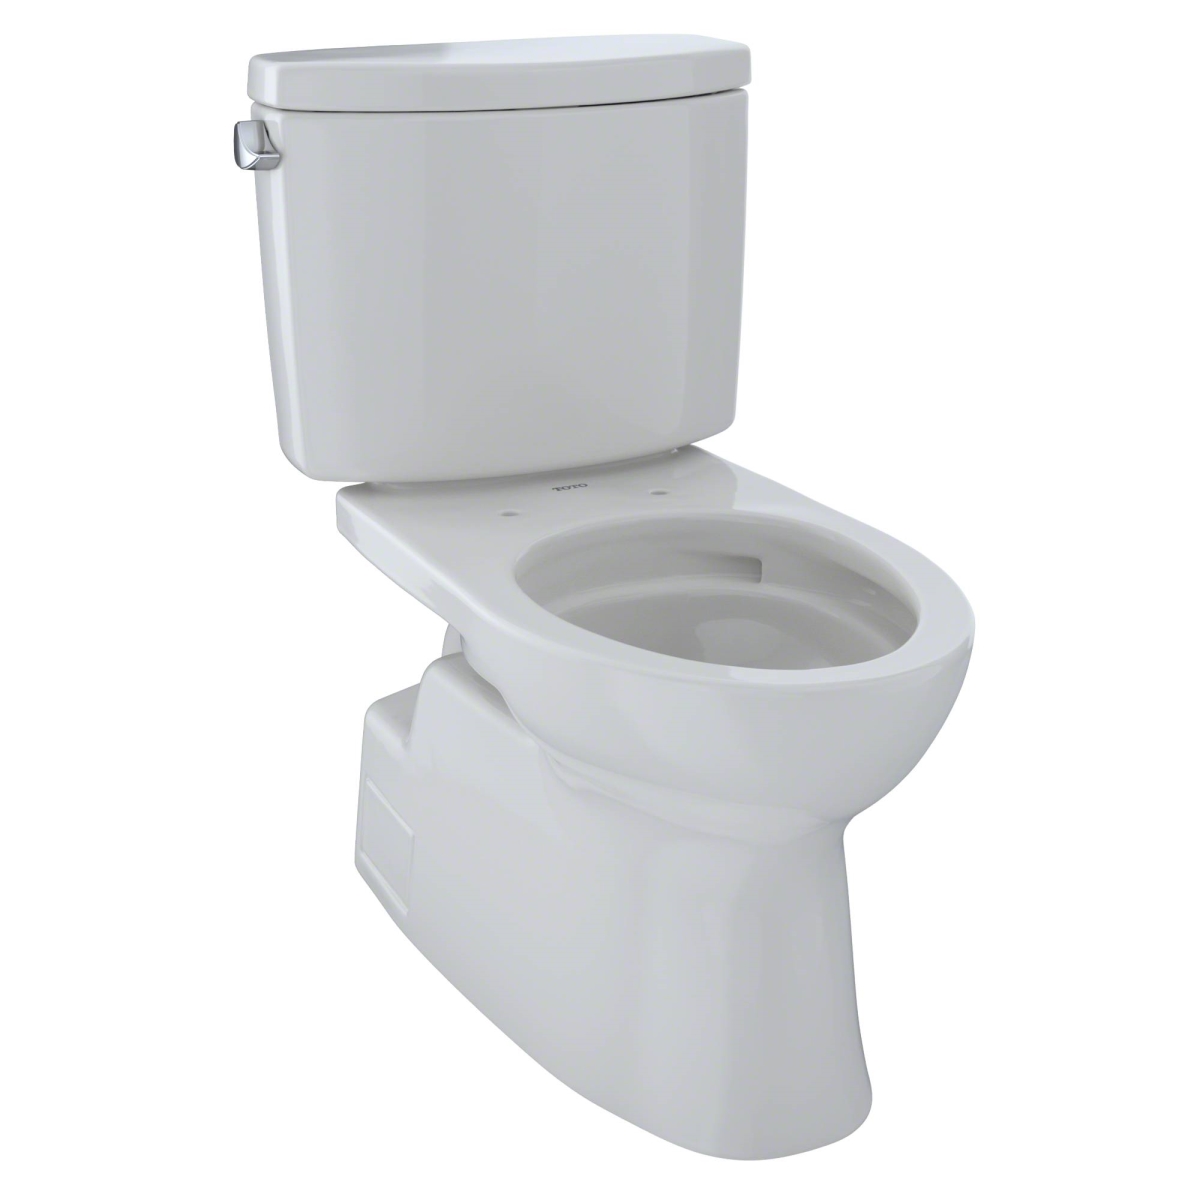 Cst474cefg-11 Elongated 1.28 Gpf Universal Height Skirted Design Toilet With Cefiontect, Colonial White